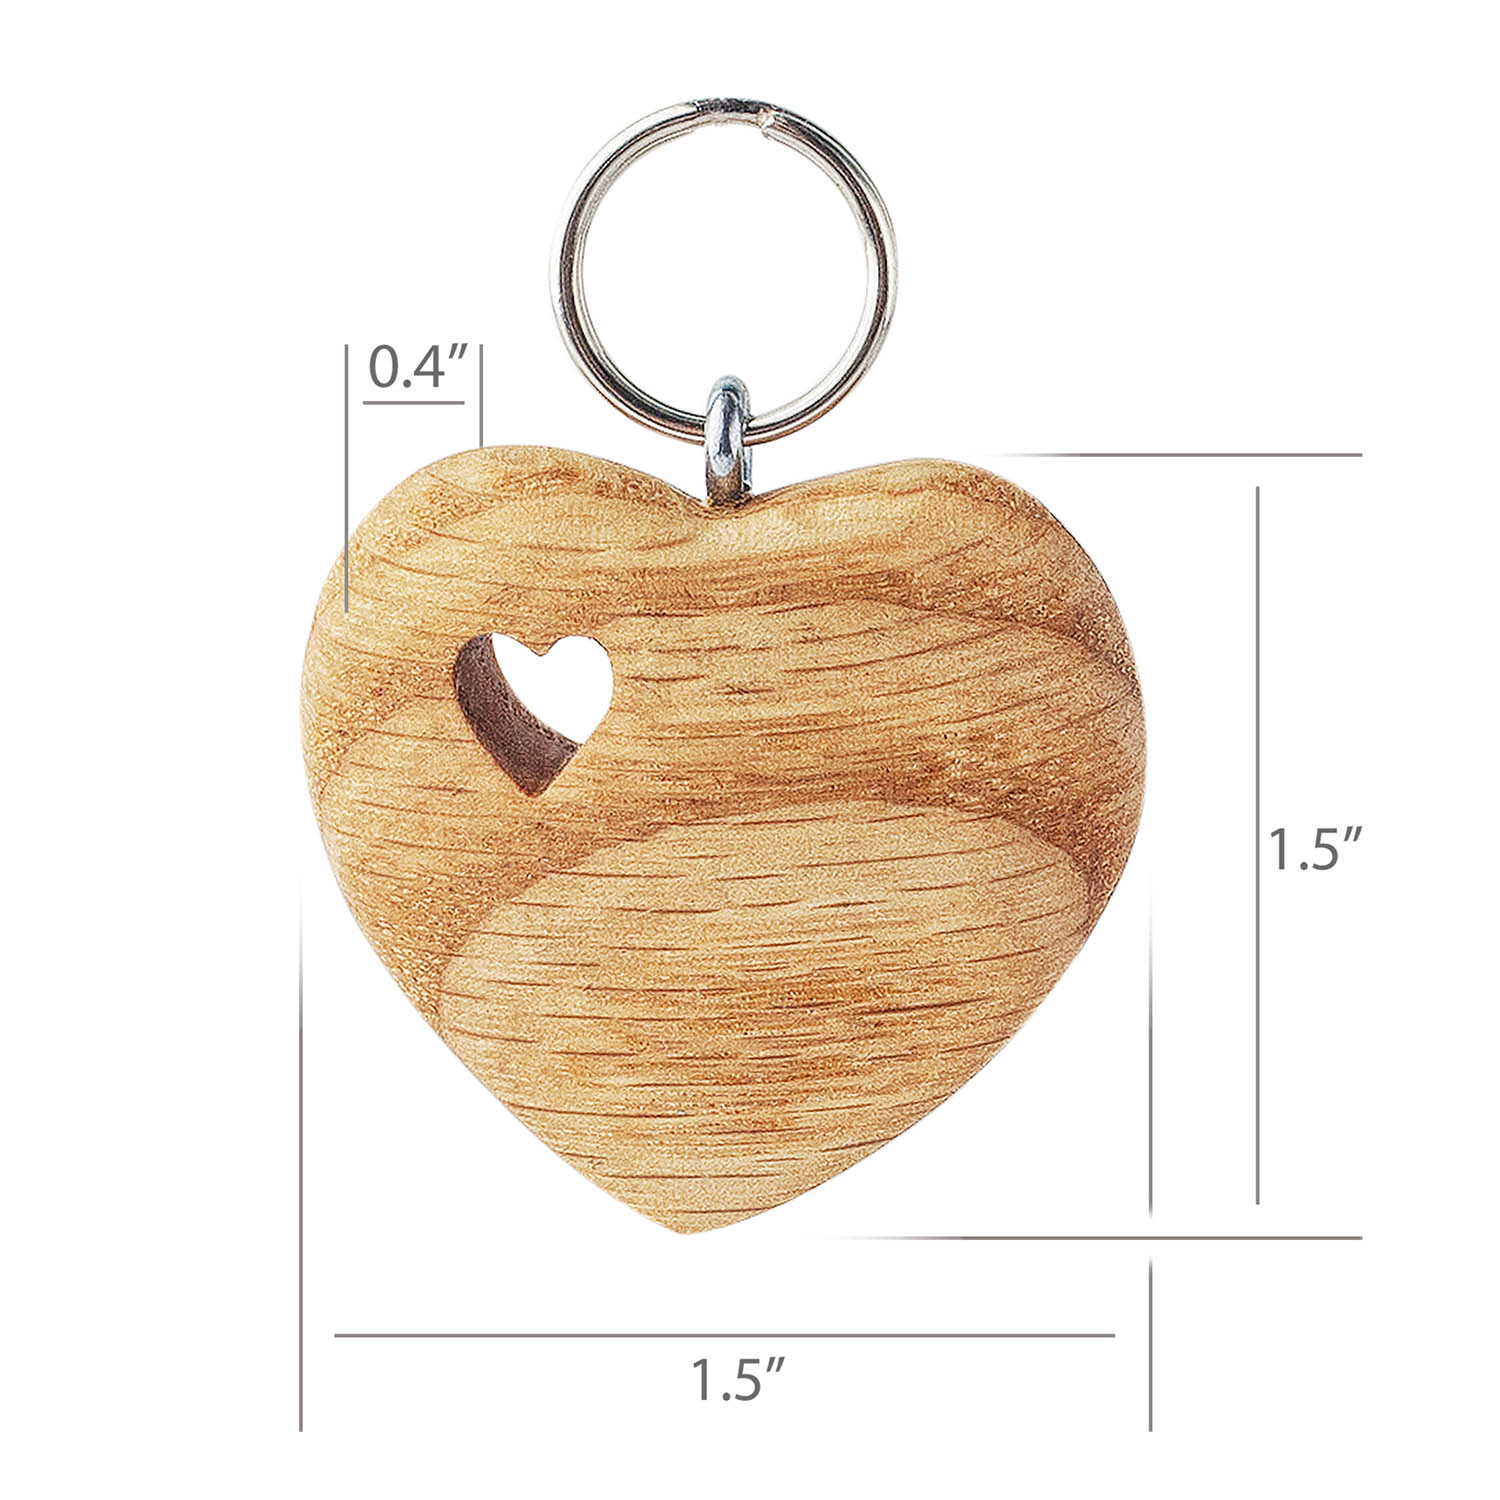 Wooden Cute Heart Shaped Keychains for Women and Men - Forest Decor